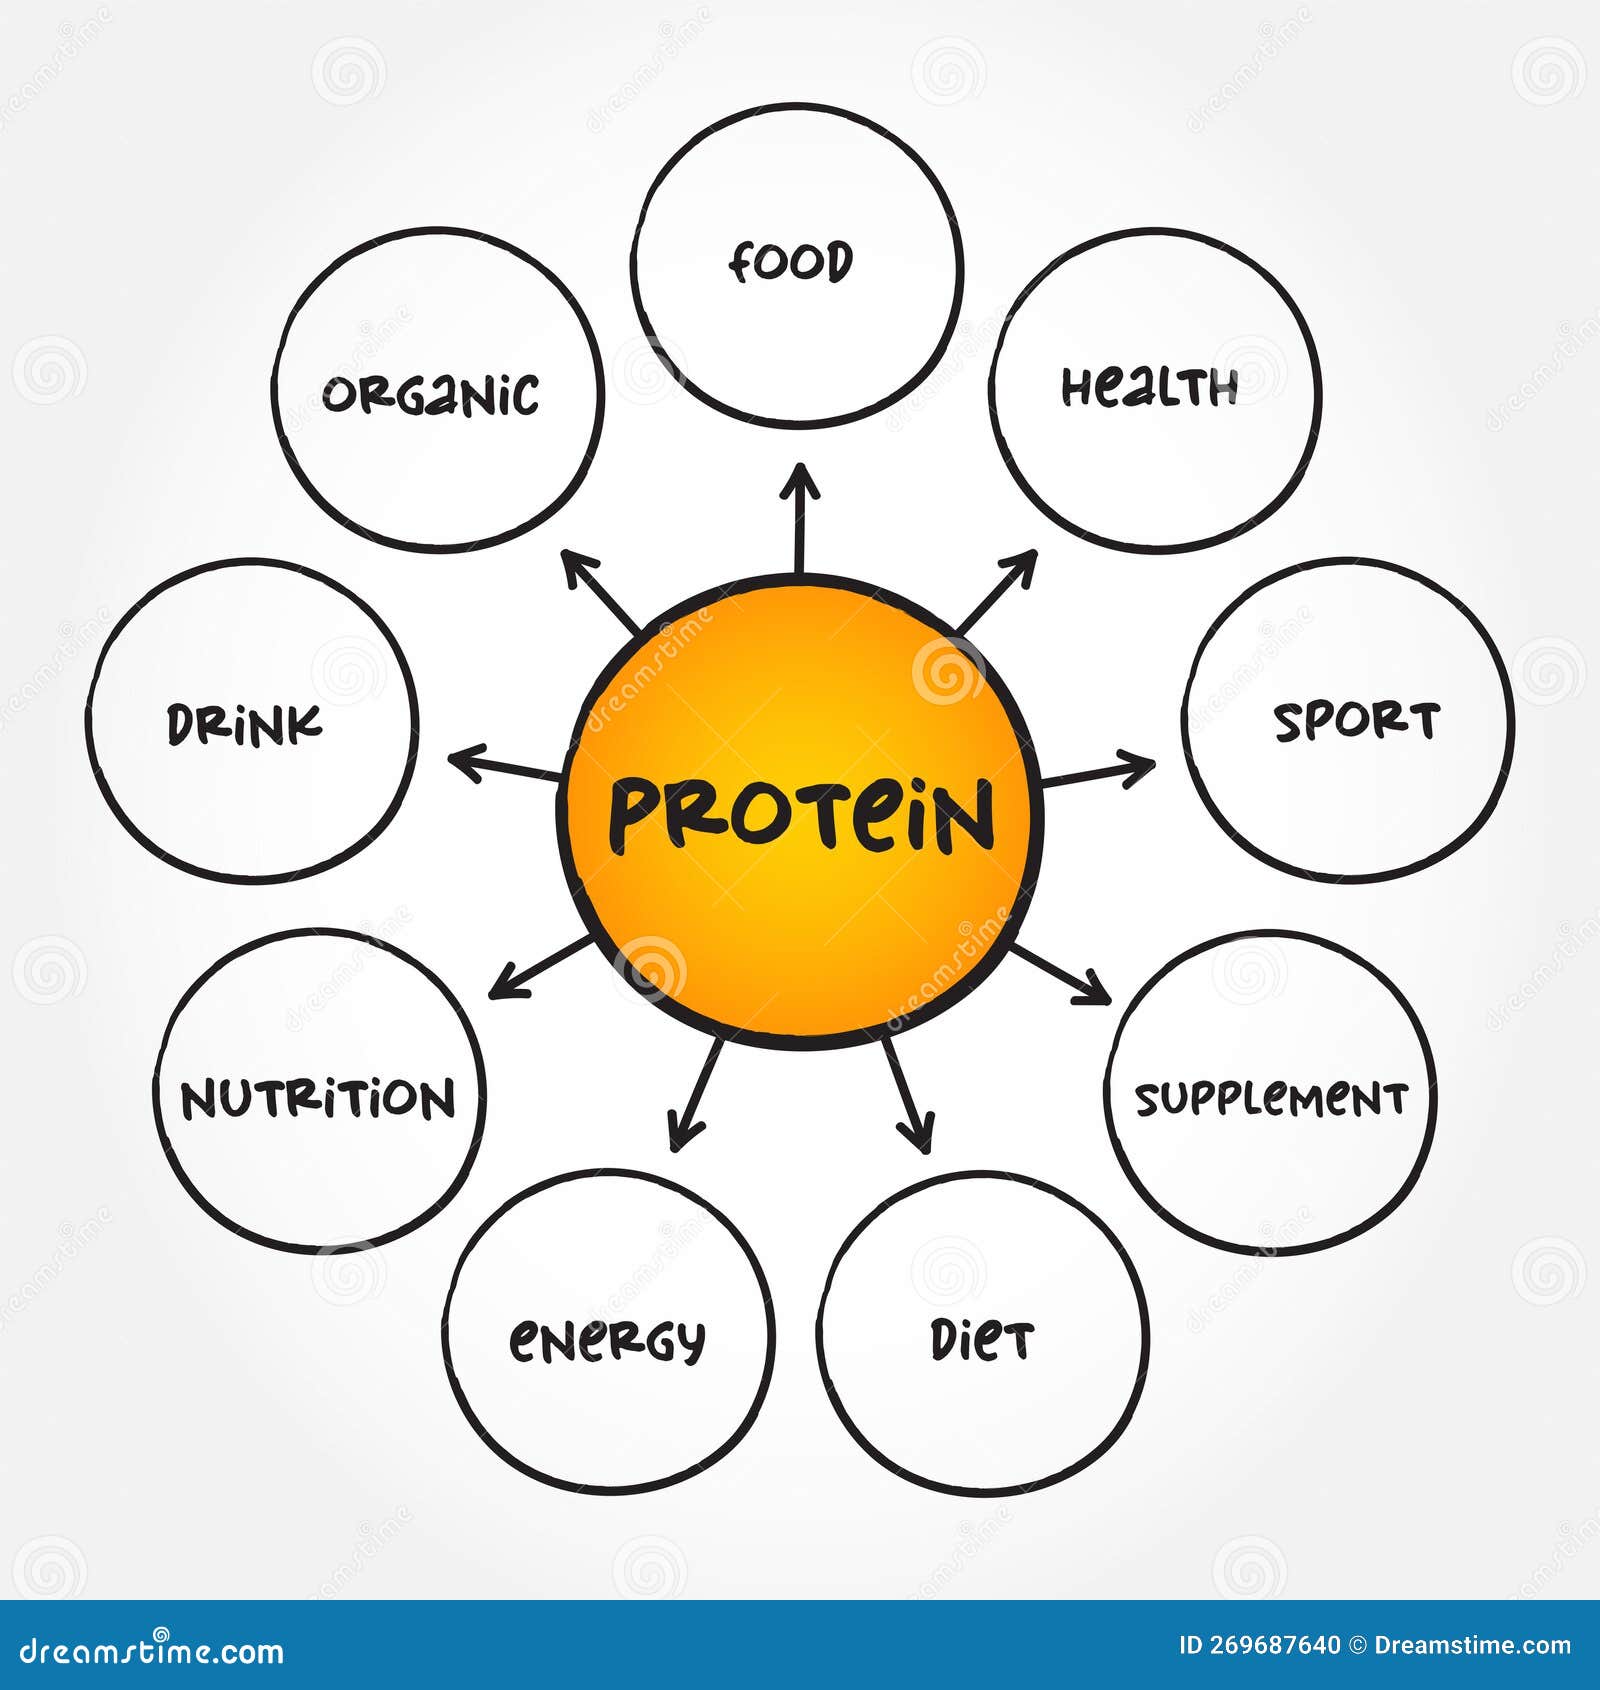 protein are large biomolecule and macromolecule that comprise one or more long chains of amino acid residues, mind map concept